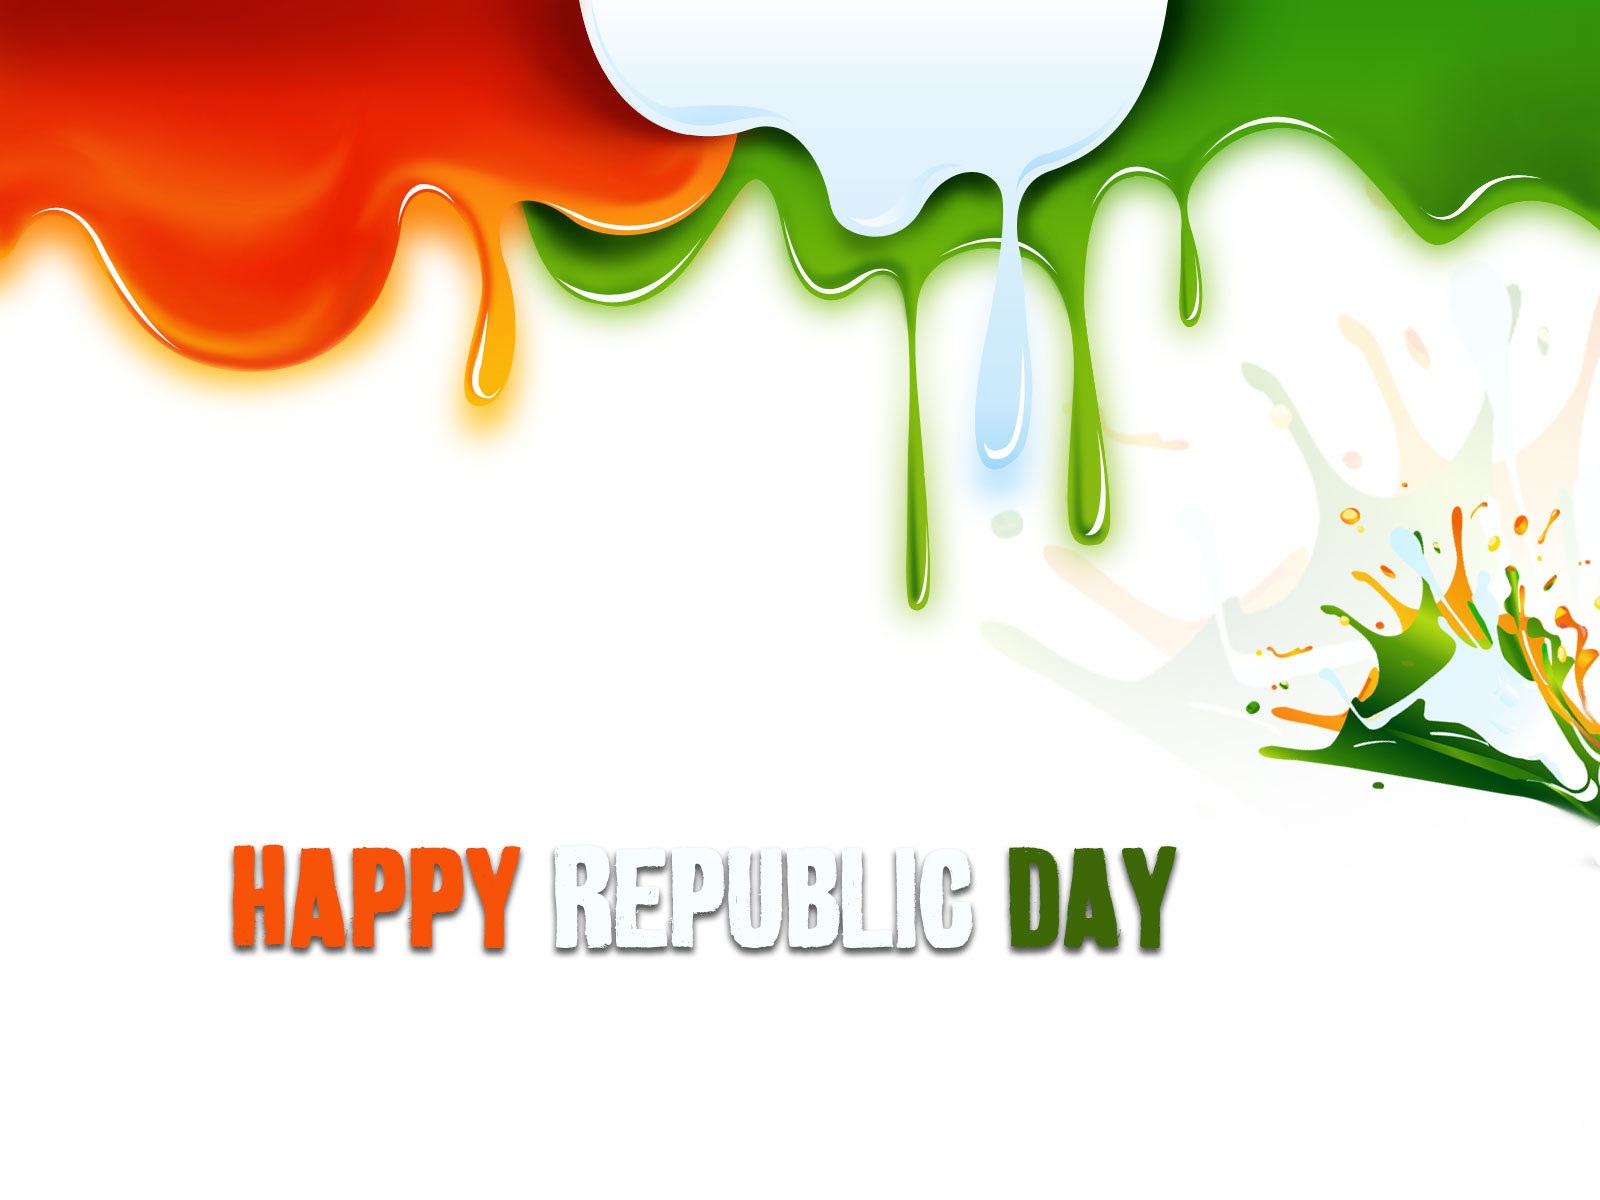 Happy Republic Day Wallpapers - 26 January 2020 Background - HD Wallpaper 